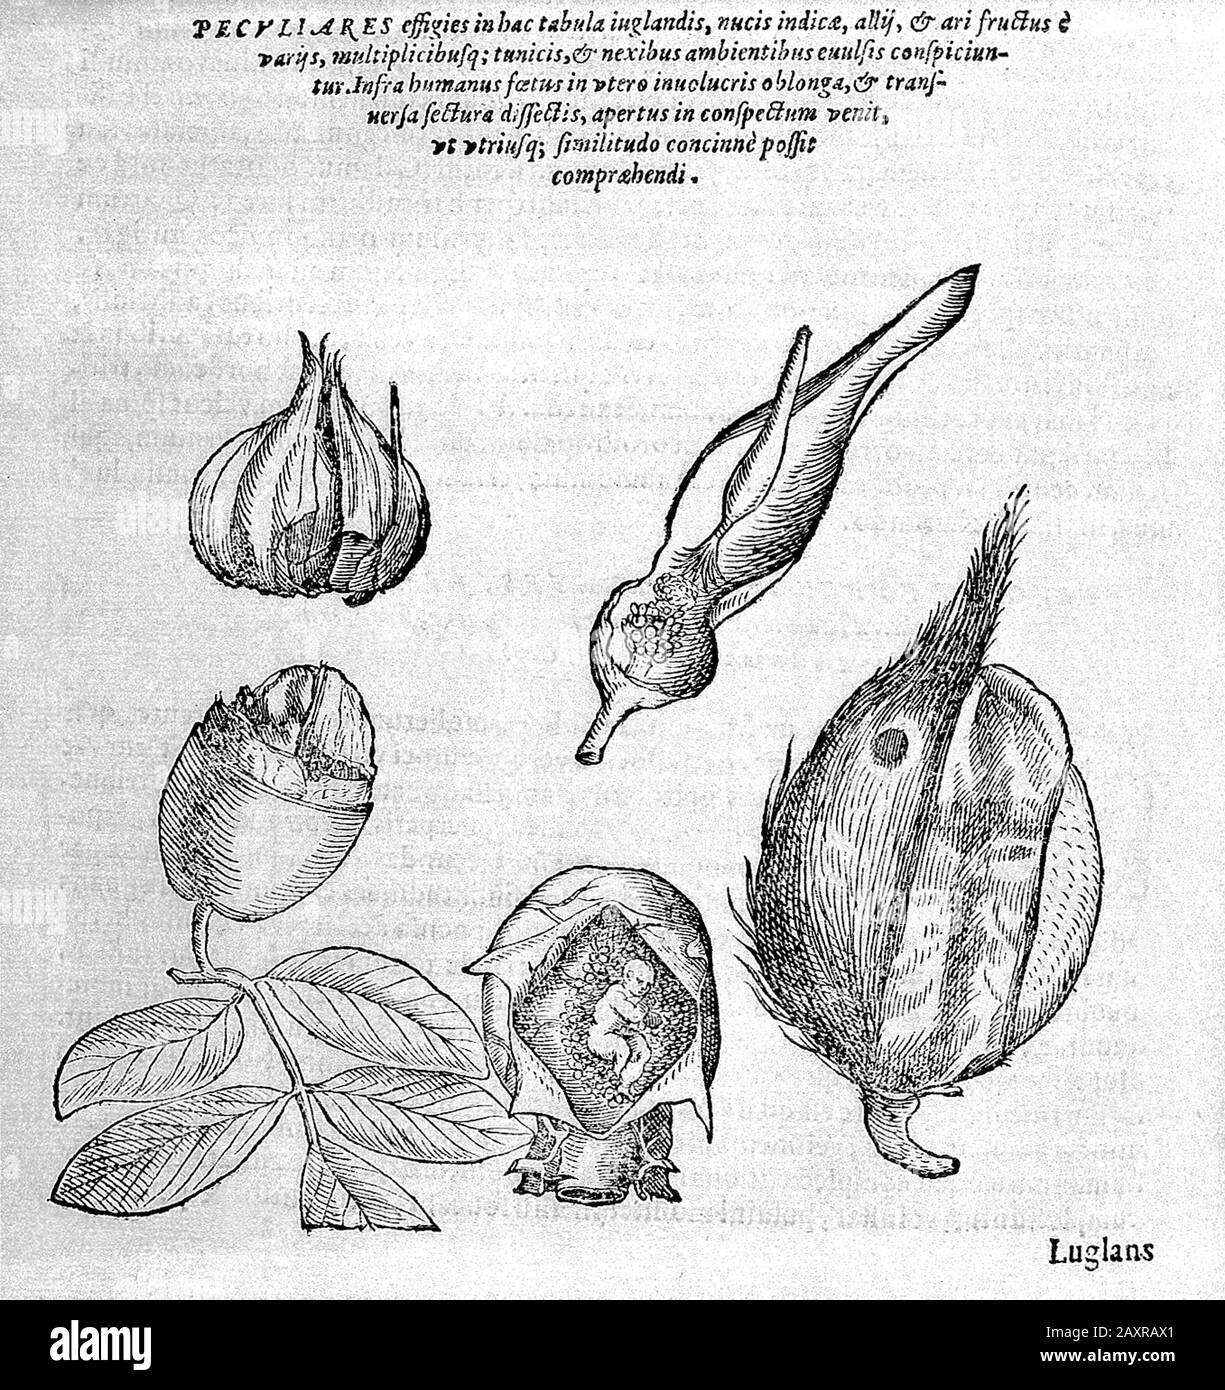 1588, ITALY : The celebrated italian philosopher , polymath , occultist , dramatist and alchemist GIOVANNI BATTISTA DELLA PORTA ( Vico Equense , 1535 ca - Napoli,  1615 ). Engraved of a plant with seed-pods resembling the human womb, and (below) a foetus in the womb, from book PHYTOGNOMONICA, printed in Napoli, 1588 . - FISIOGNOMICA - PHYSIOGNOMY - FILOSOFO - FILOSOFIA - ALCHEMY - ALCHIMIA - ALCHIMISTA - PHILOSOPHY - TEATRO - THEATRE - commediografo - drammaturgo - playwrighter - Giambattista - Giovambattista - MATEMATICO - MATEMATICA - METEOROLOGIA - METEOROLOGO - METEOROLOGY - ASTROLOGO - AS Stock Photo